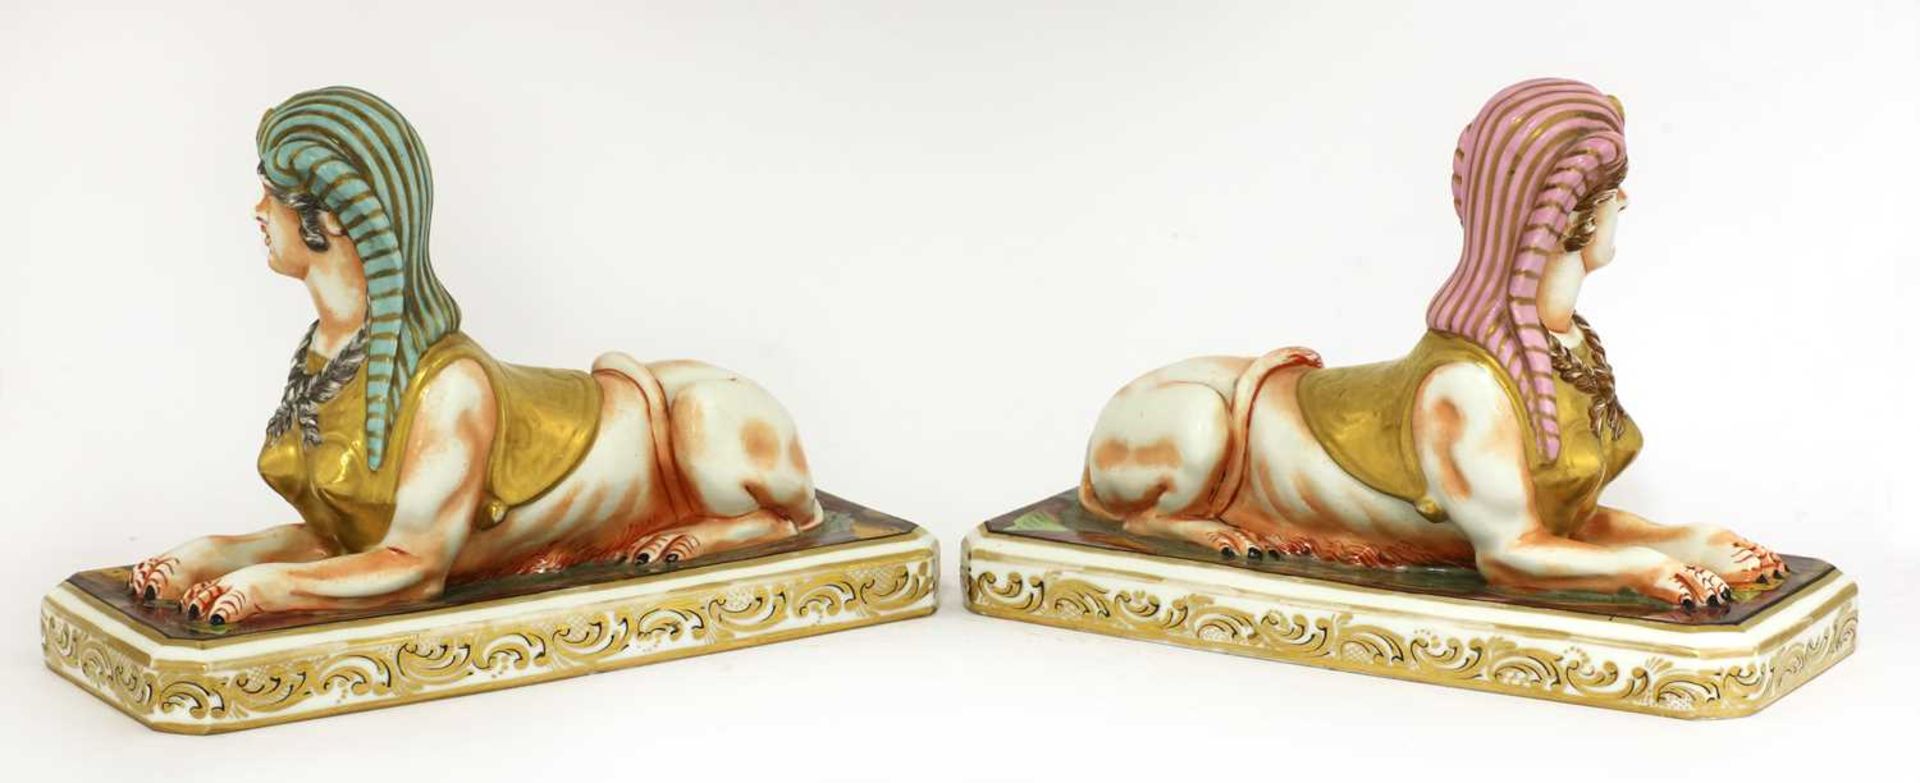 A pair of pottery sphinxes, - Image 2 of 3